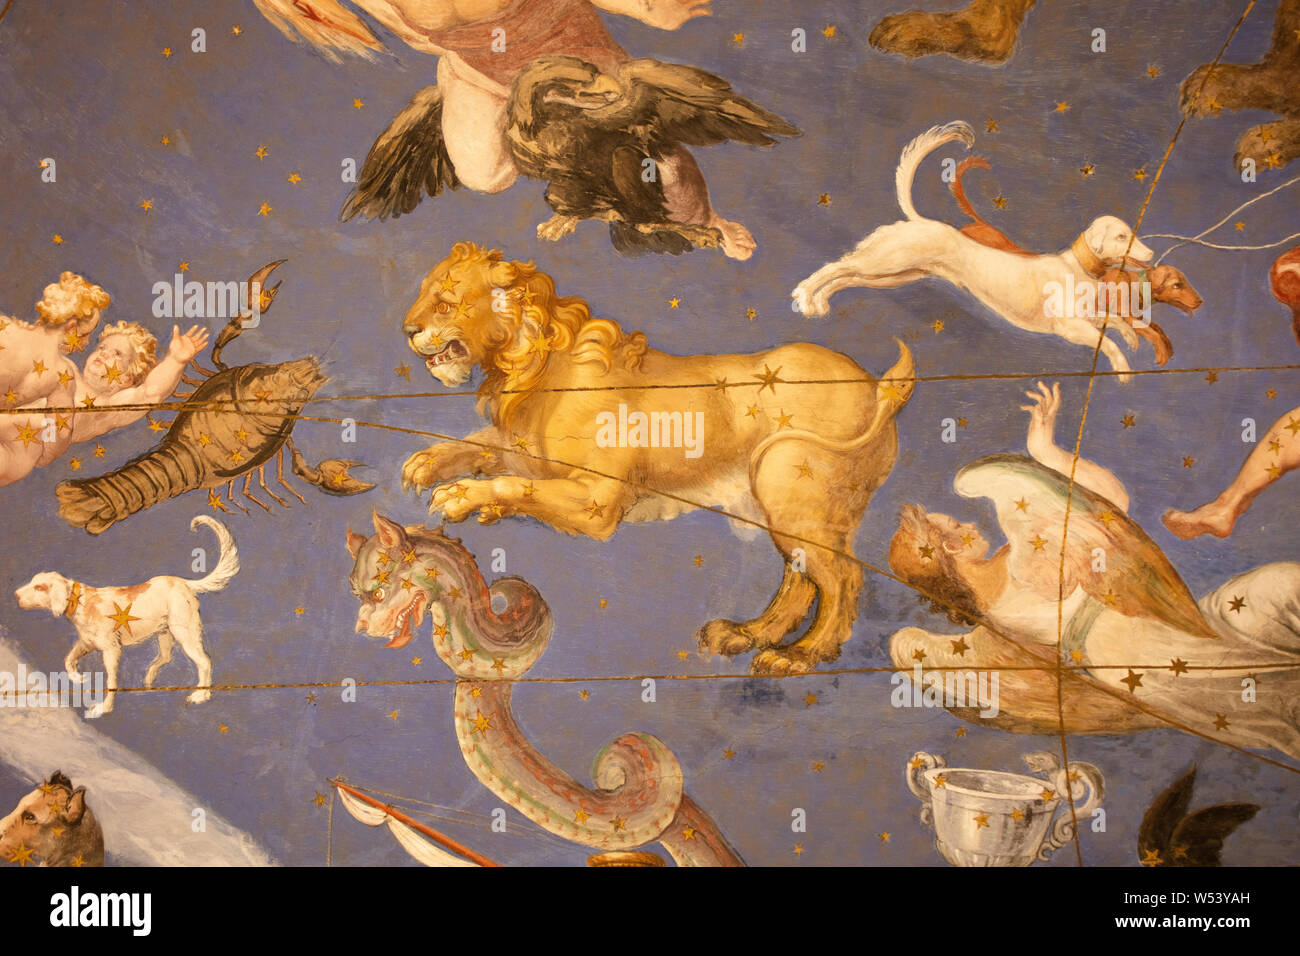 Detail of the 16th century decoration showing the zodiac signs on the ceiling of the map room in Villa Farnese. Stock Photo